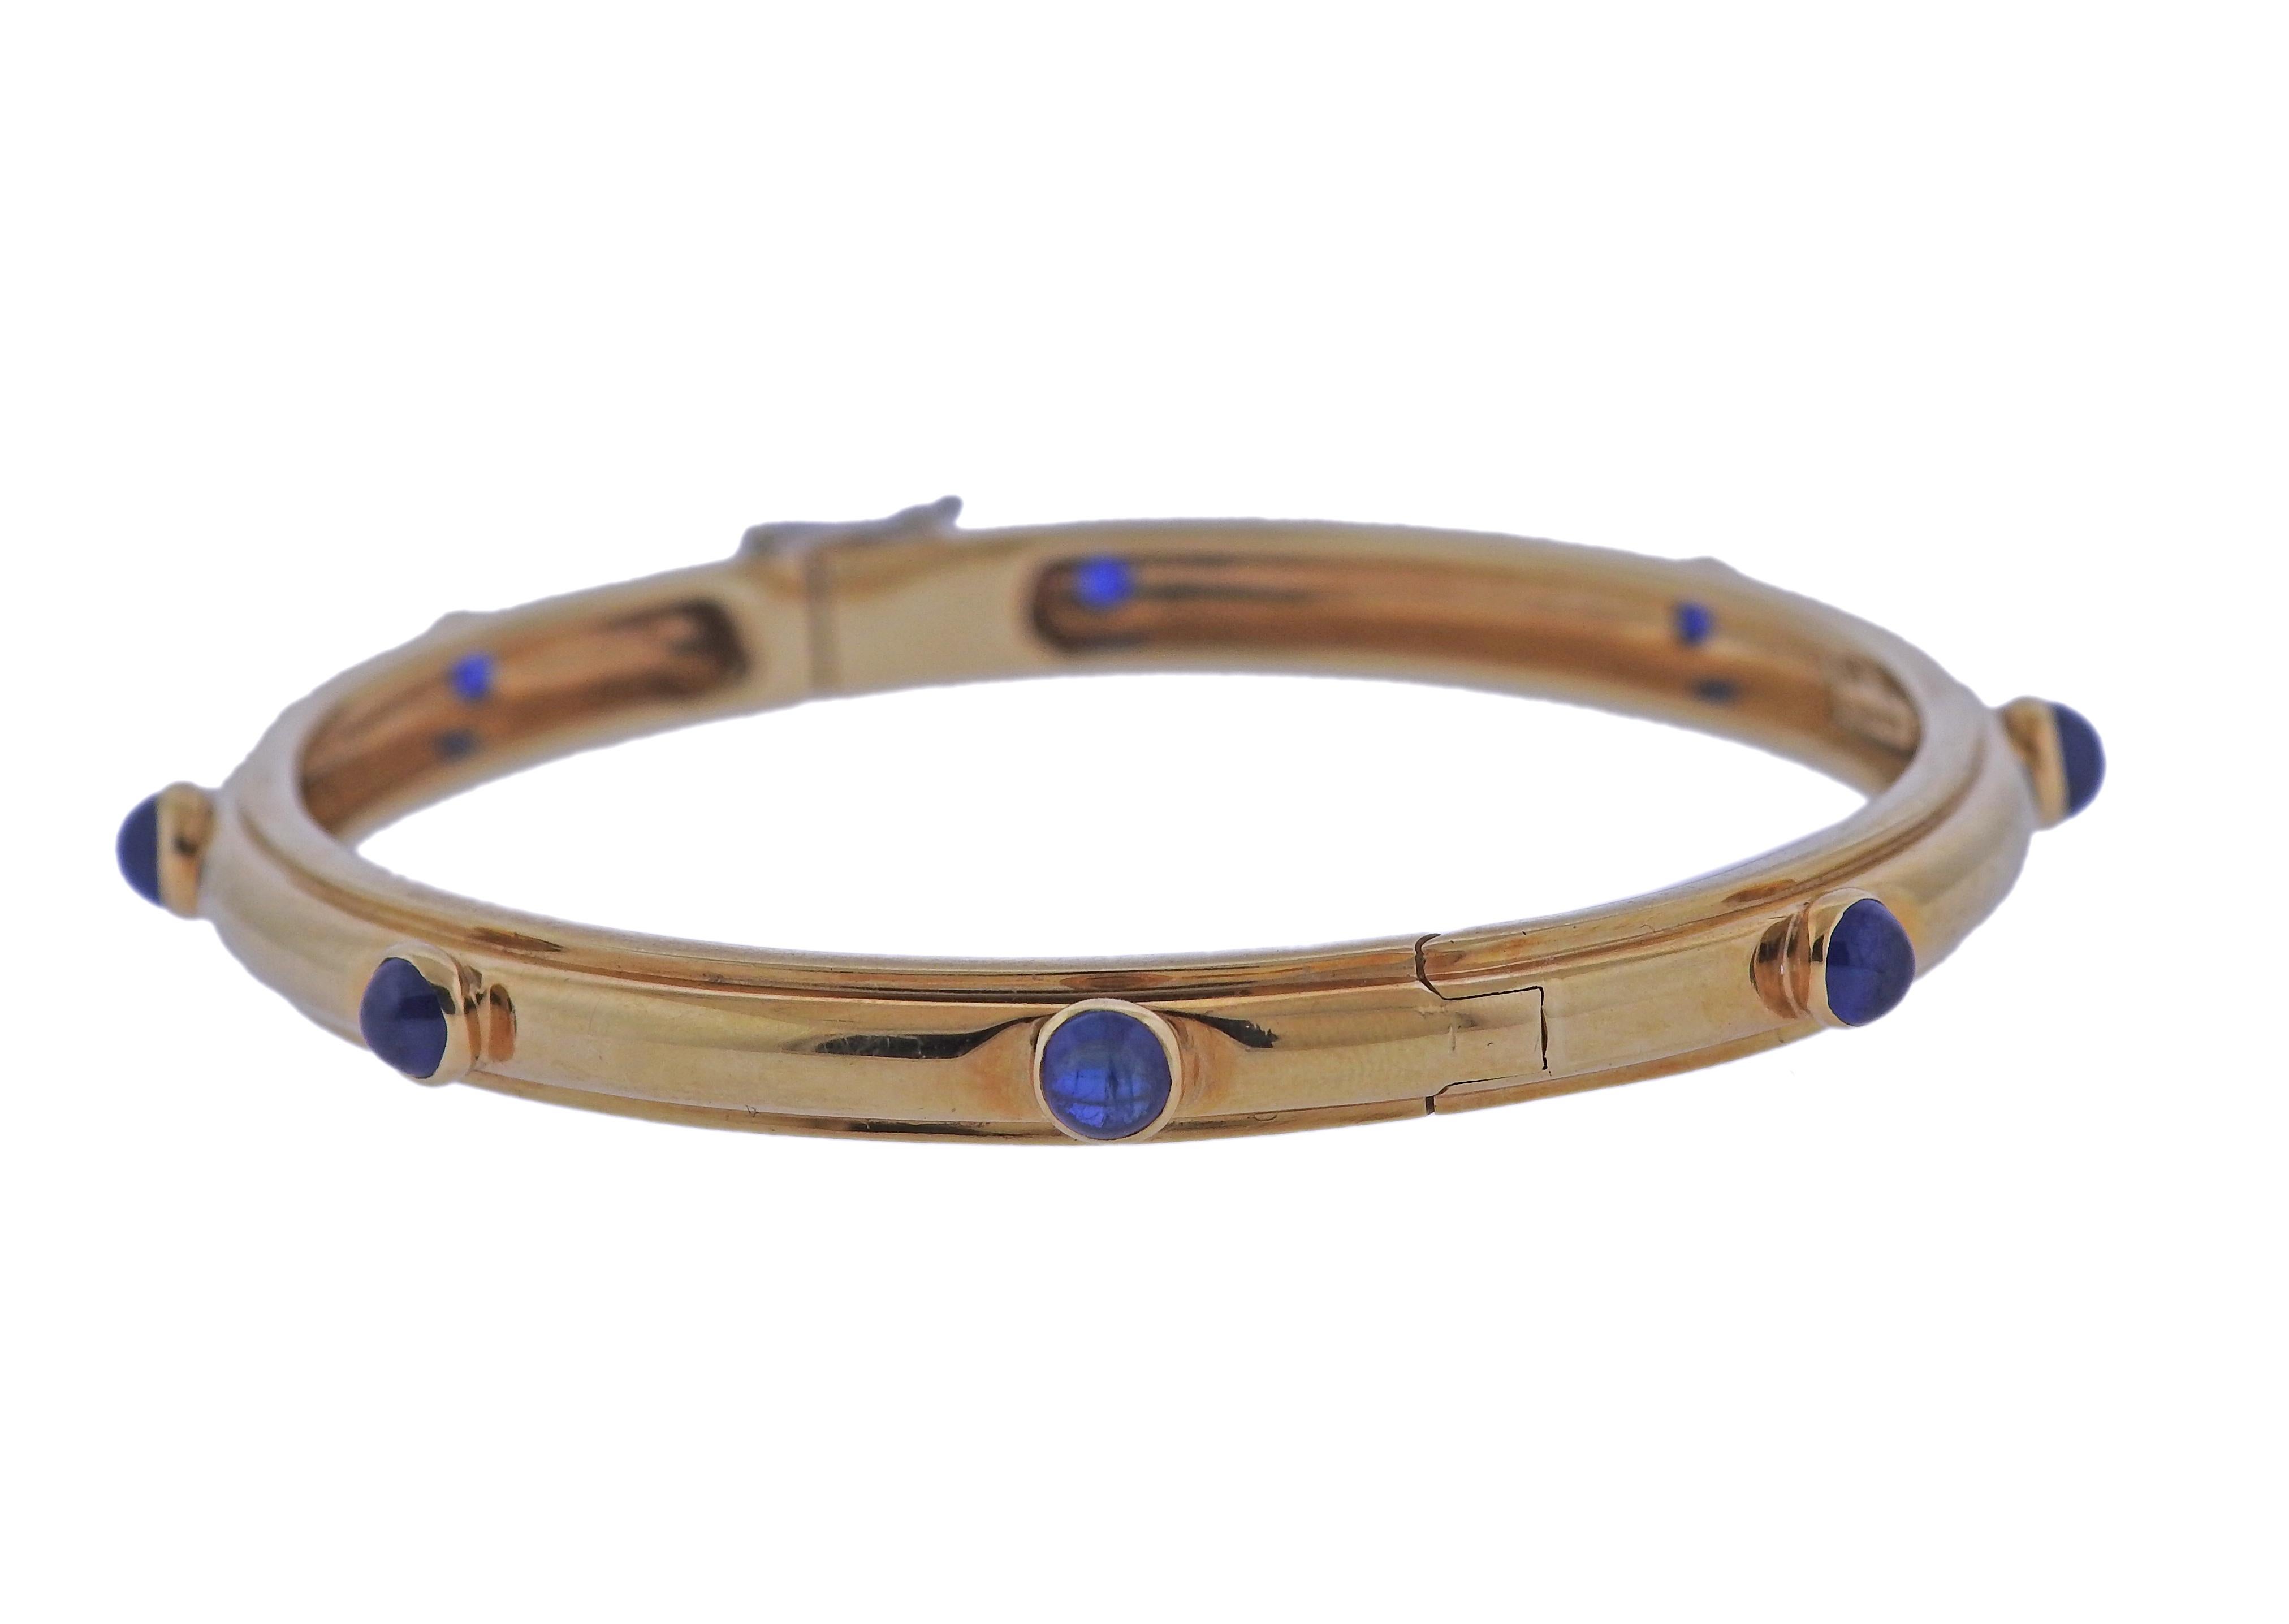 18k yellow gold bangle bracelet by Tiffany & Co, set with 4mm sapphire cabochons. Bracelet will fit up to a 7